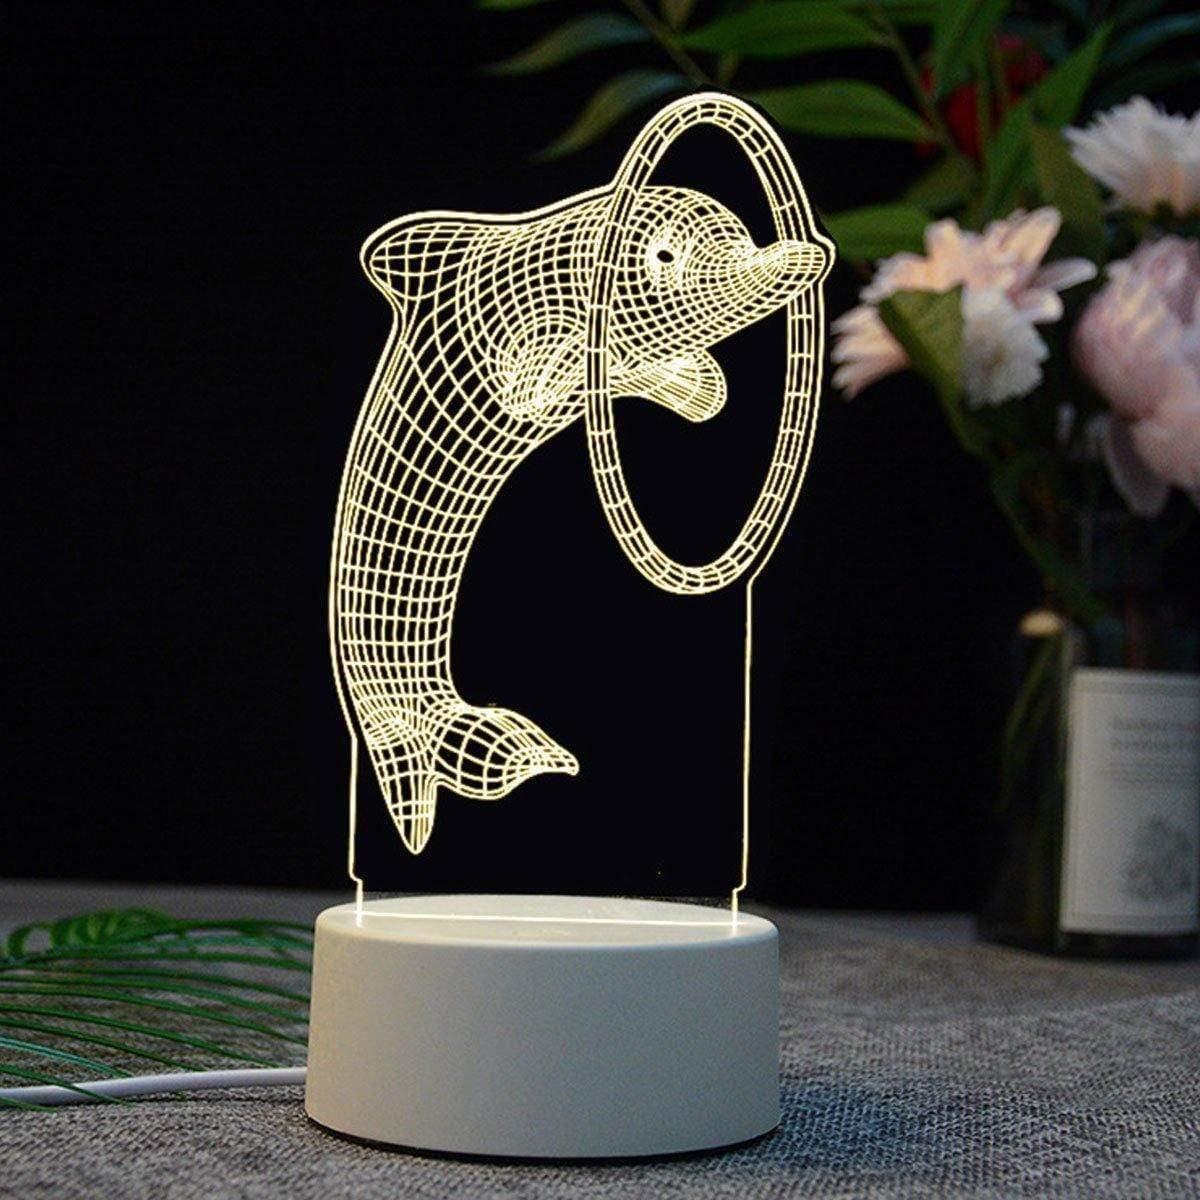 ezy2find Bedroom Child Gift D 3D LED Table Kid Night Light Lamp 16 Color USB Bedroom Child Gift Remote Control